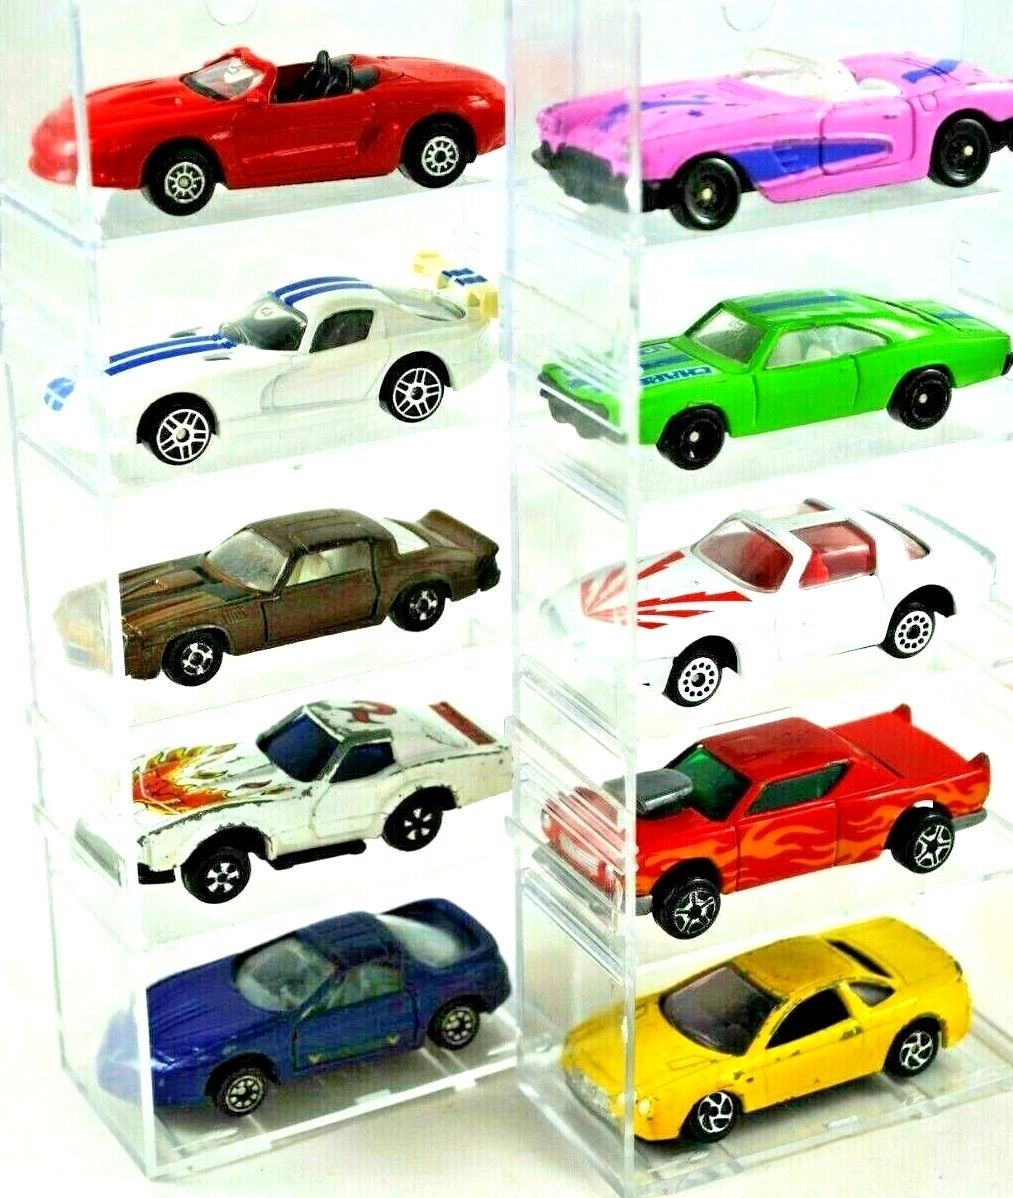 USA FORD MUSTANG CHEVROLET CORVETTE DODGE CHARGER PONTIAC Matchbox Size Cars